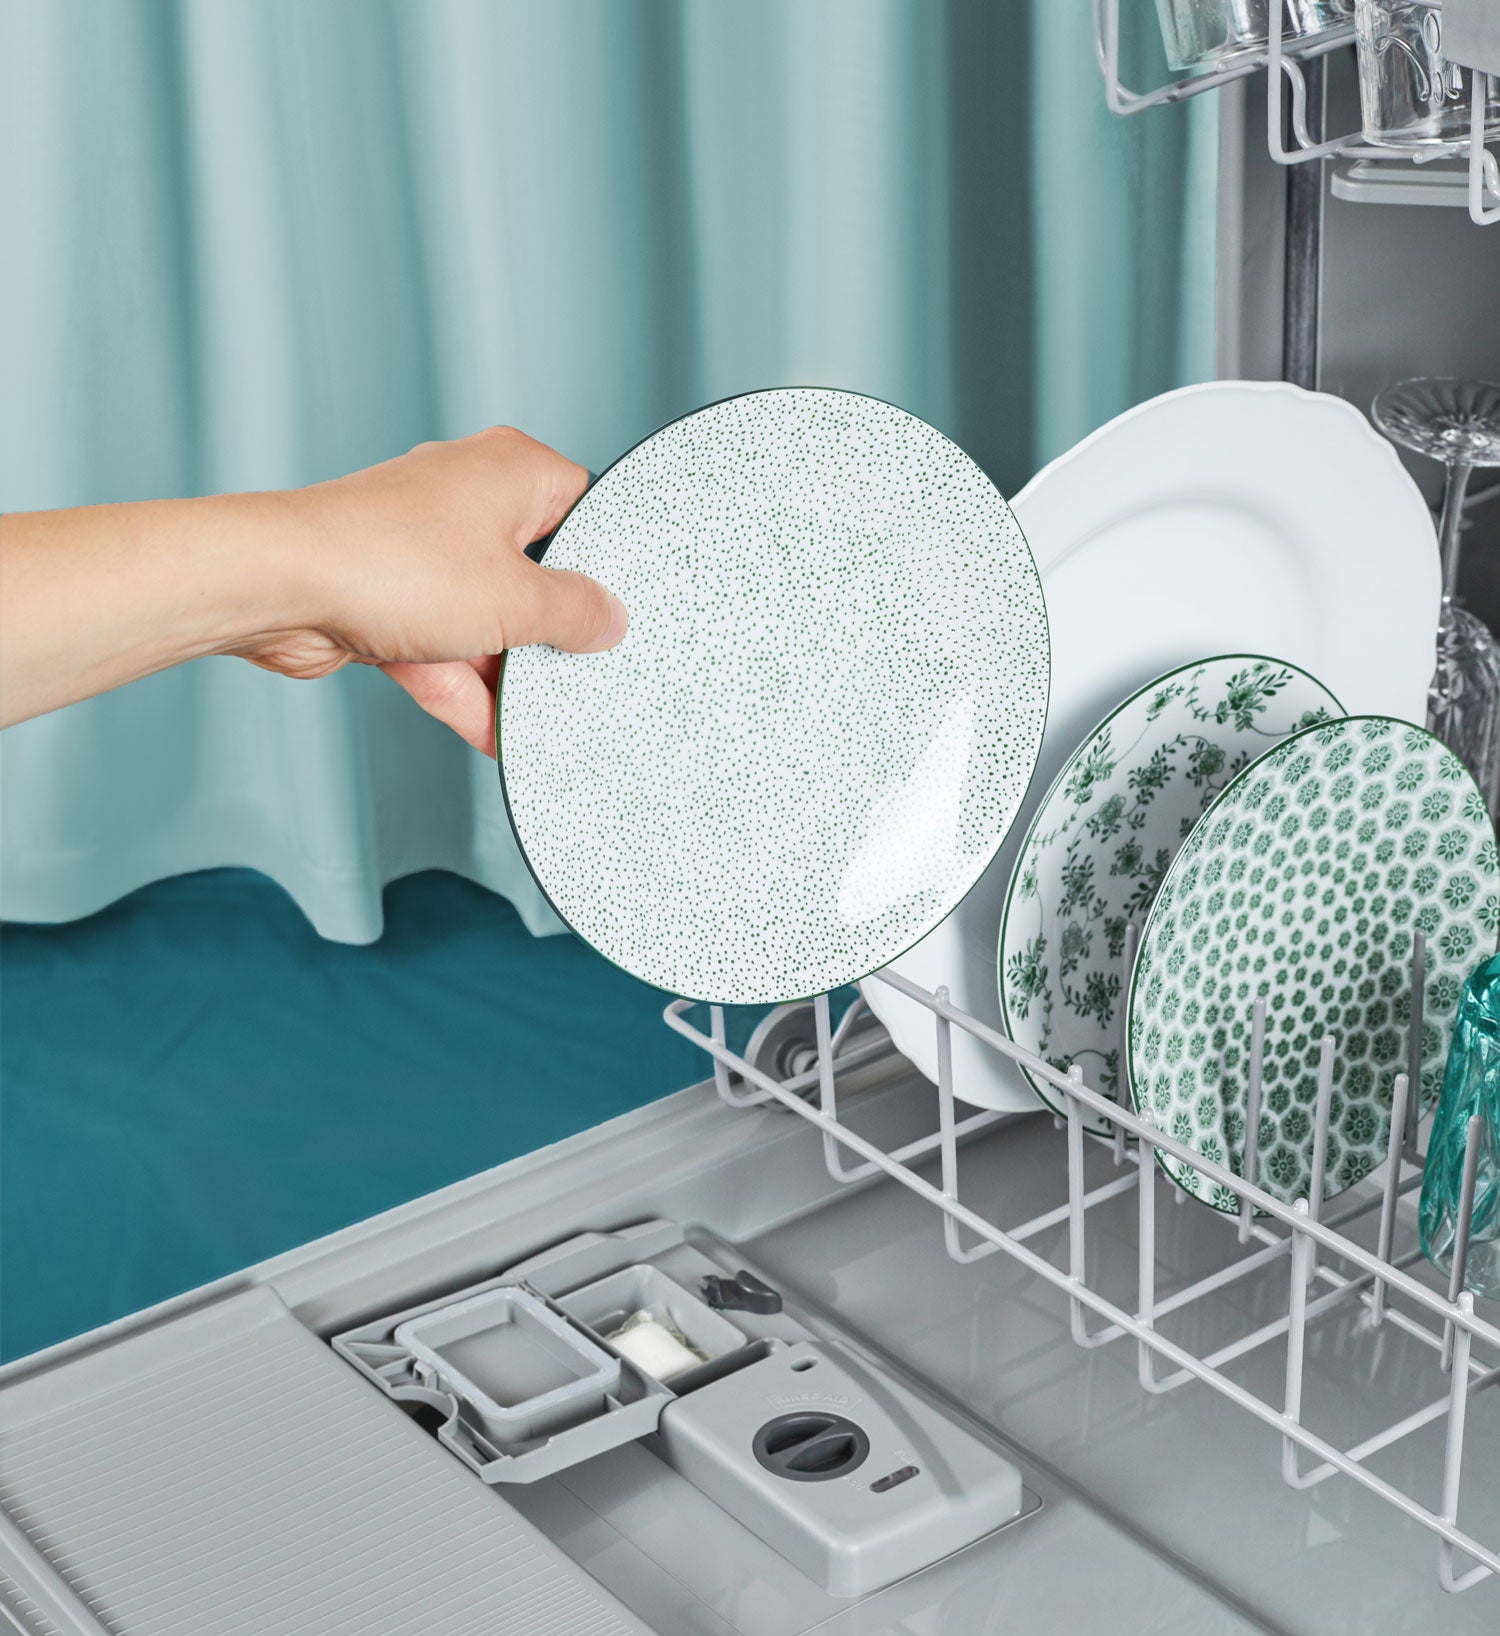 2 Dishwasher Pods Storage Solutions That Are Super Cheap